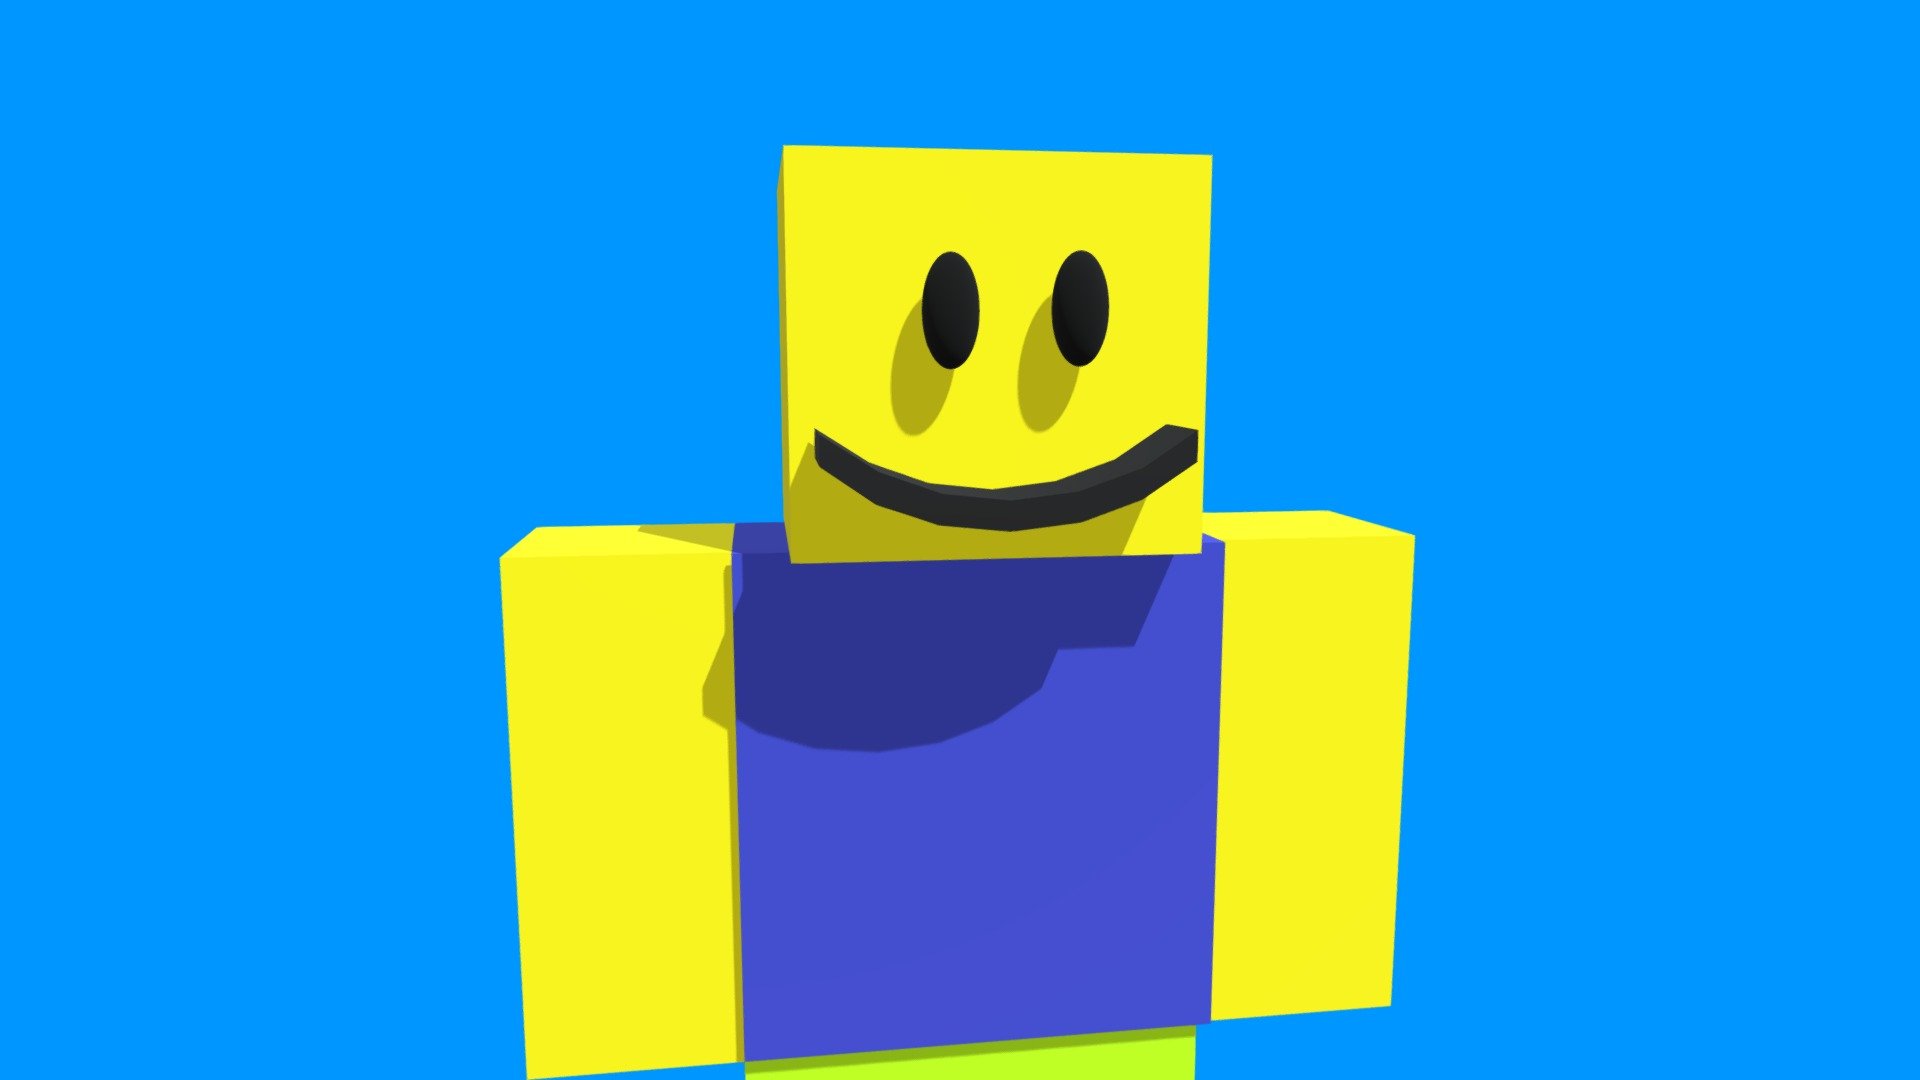 ROBLOX Noob - Download Free 3D model by remaster2011 (@remaster2011)  [9e65ae8]